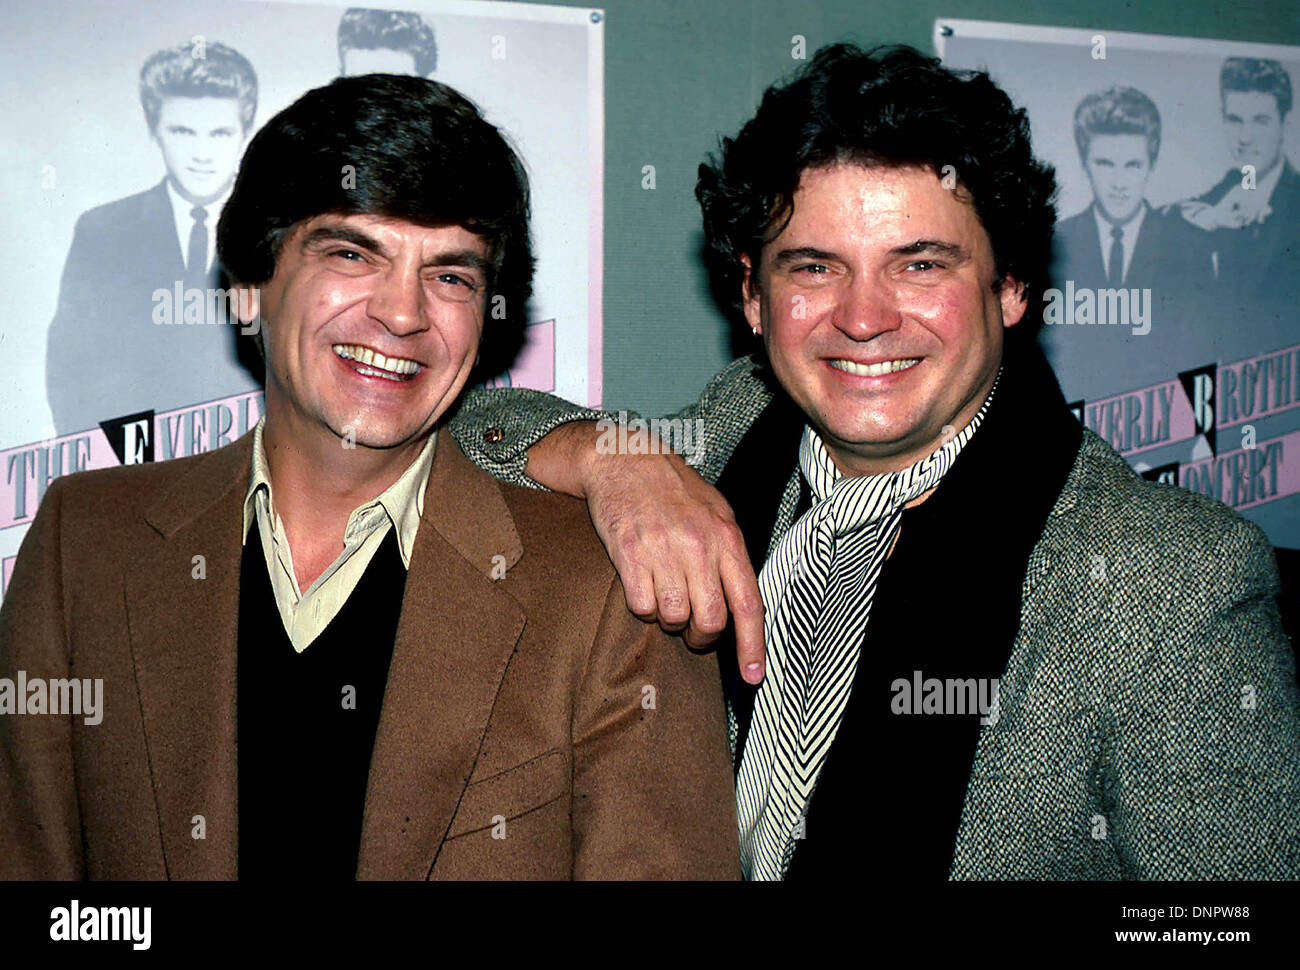 Burbank, California, USA. 3rd Jan, 2014. Phil Everly, who with his brother Don, made up the musical duo The Everly Brothers, died Friday from chronic obstructive pulmonary disease. He was 74 years old. PICTURED: 1984 - PHIL and DON EVERLY, the Everly Brothers. Credit:  Globe Photos/ZUMAPRESS.com/Alamy Live News Stock Photo